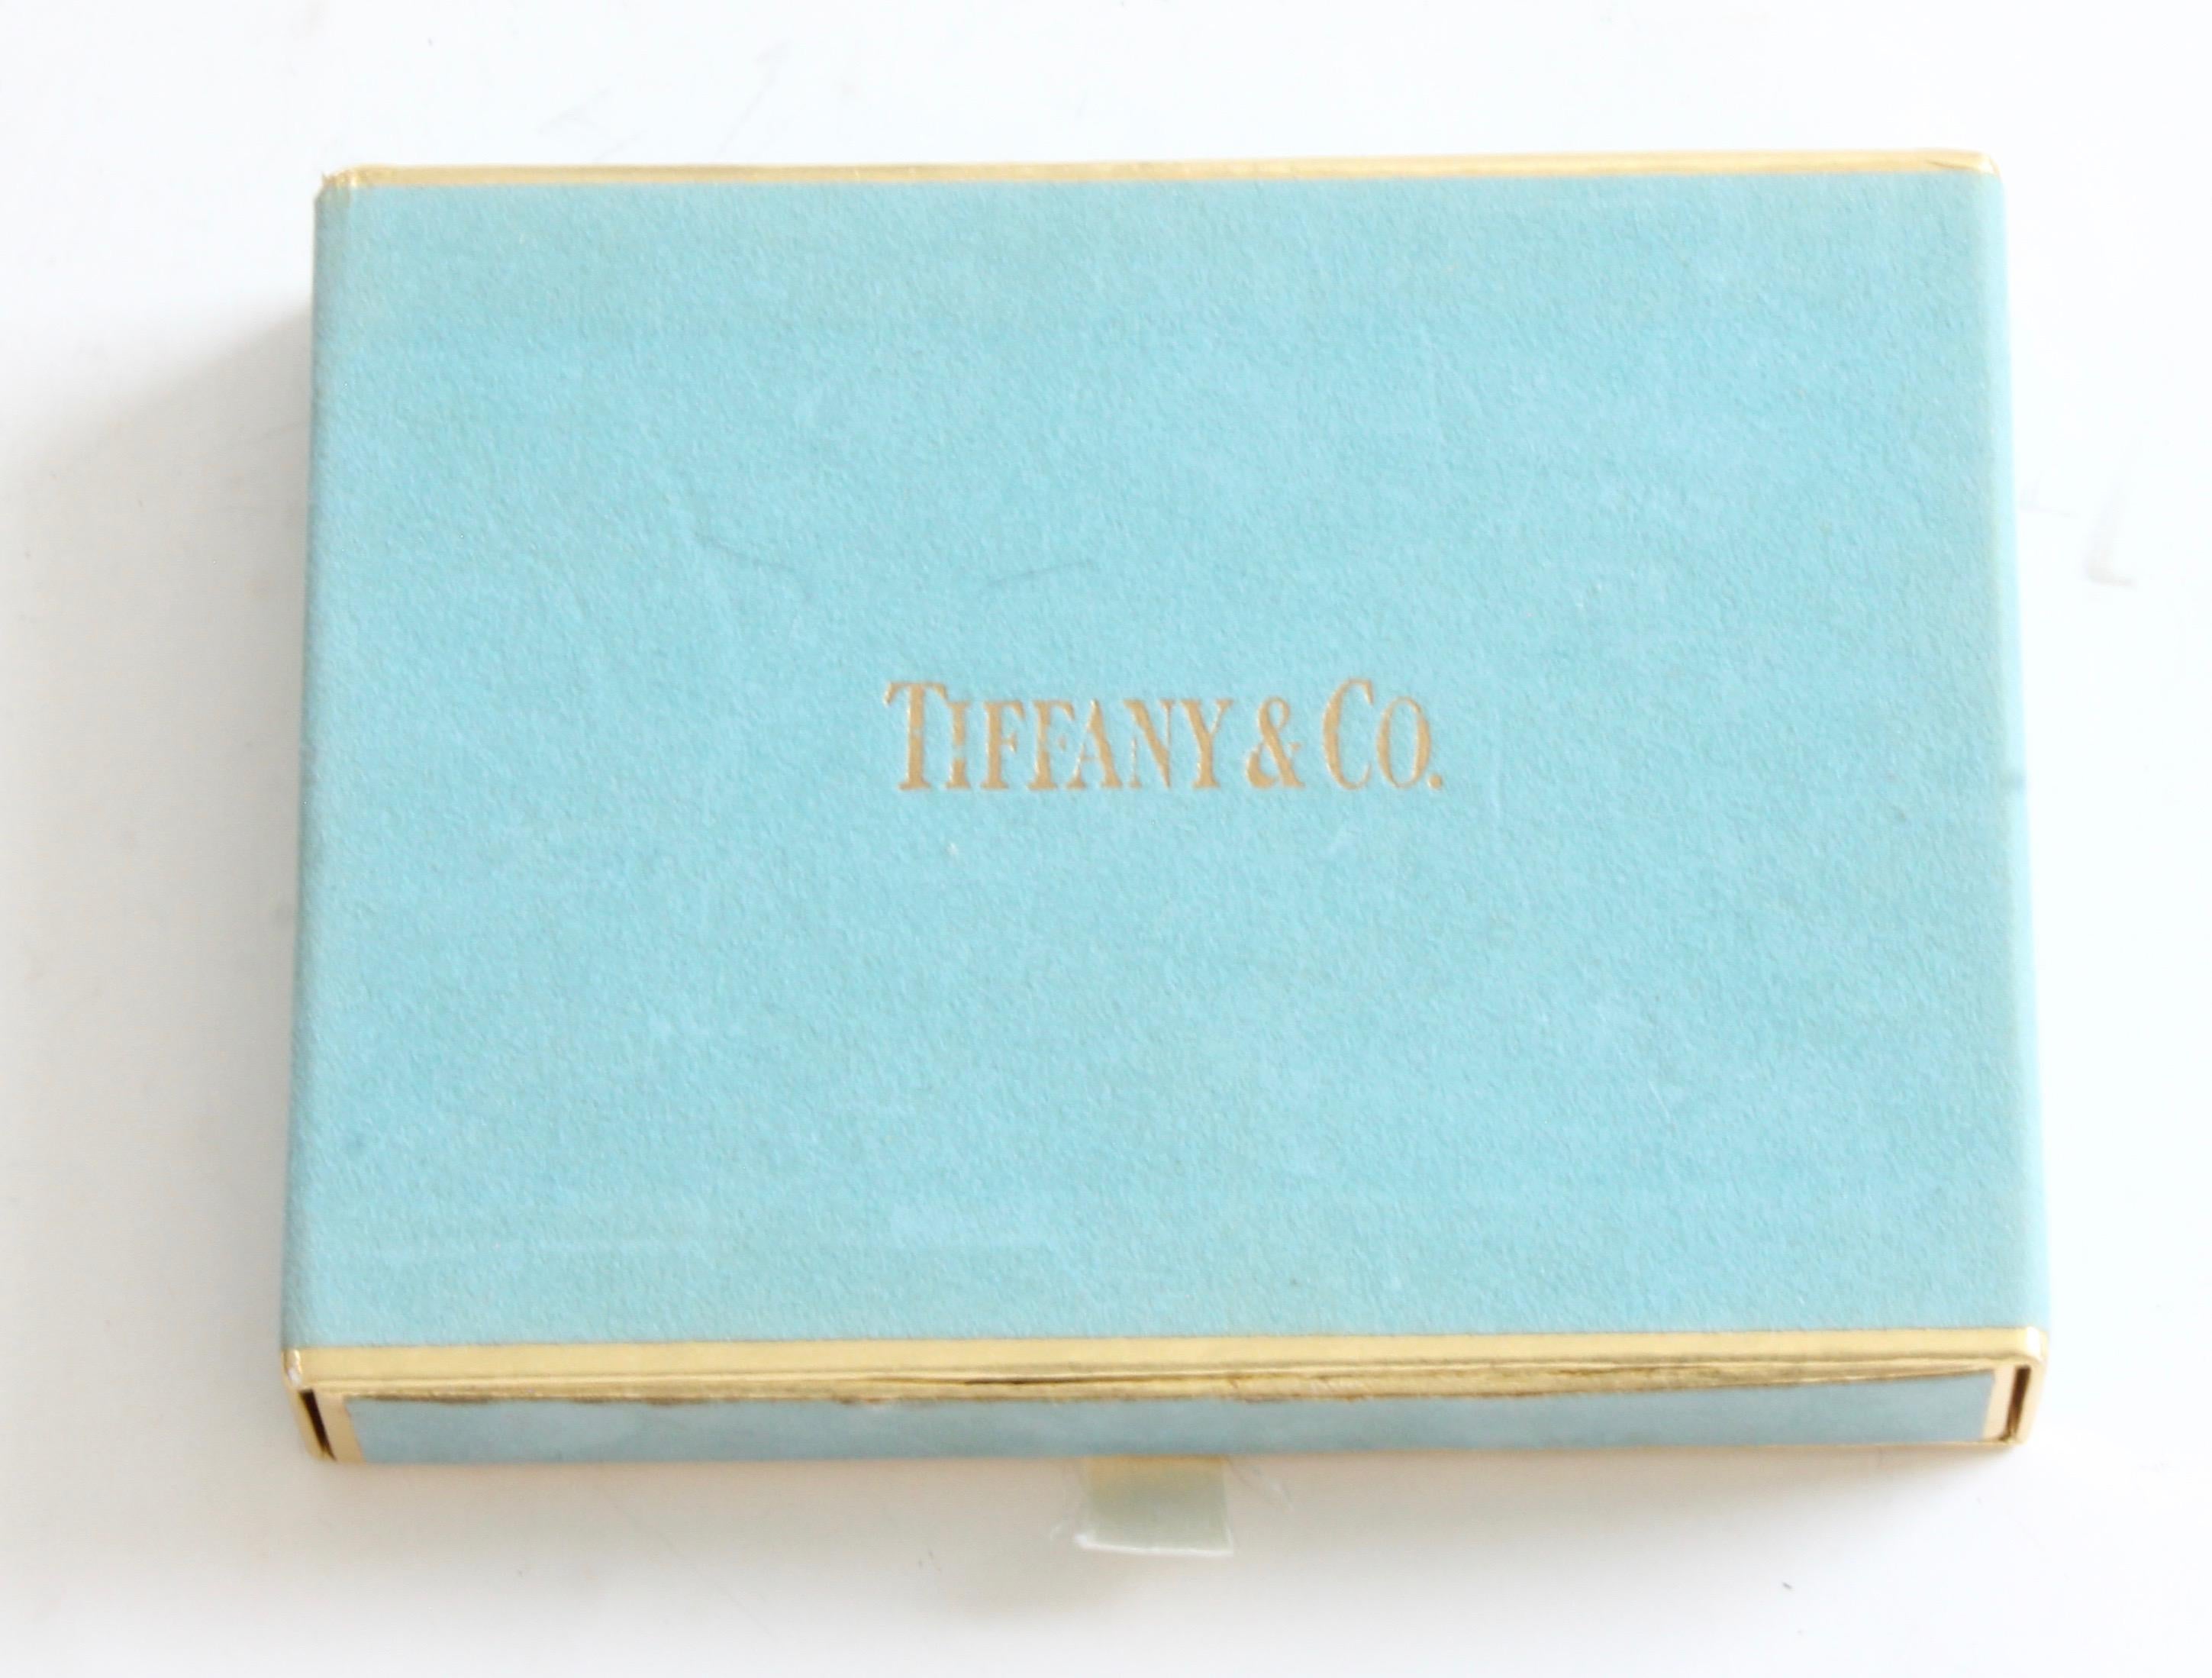 Here's a set of playing cards, made by Tiffany & Company from their Home & Accessories Collection.  Perfect for the bar or game room.  In good preowned condition, the cards are in very good condition with no folds, bends or marks.  The included blue